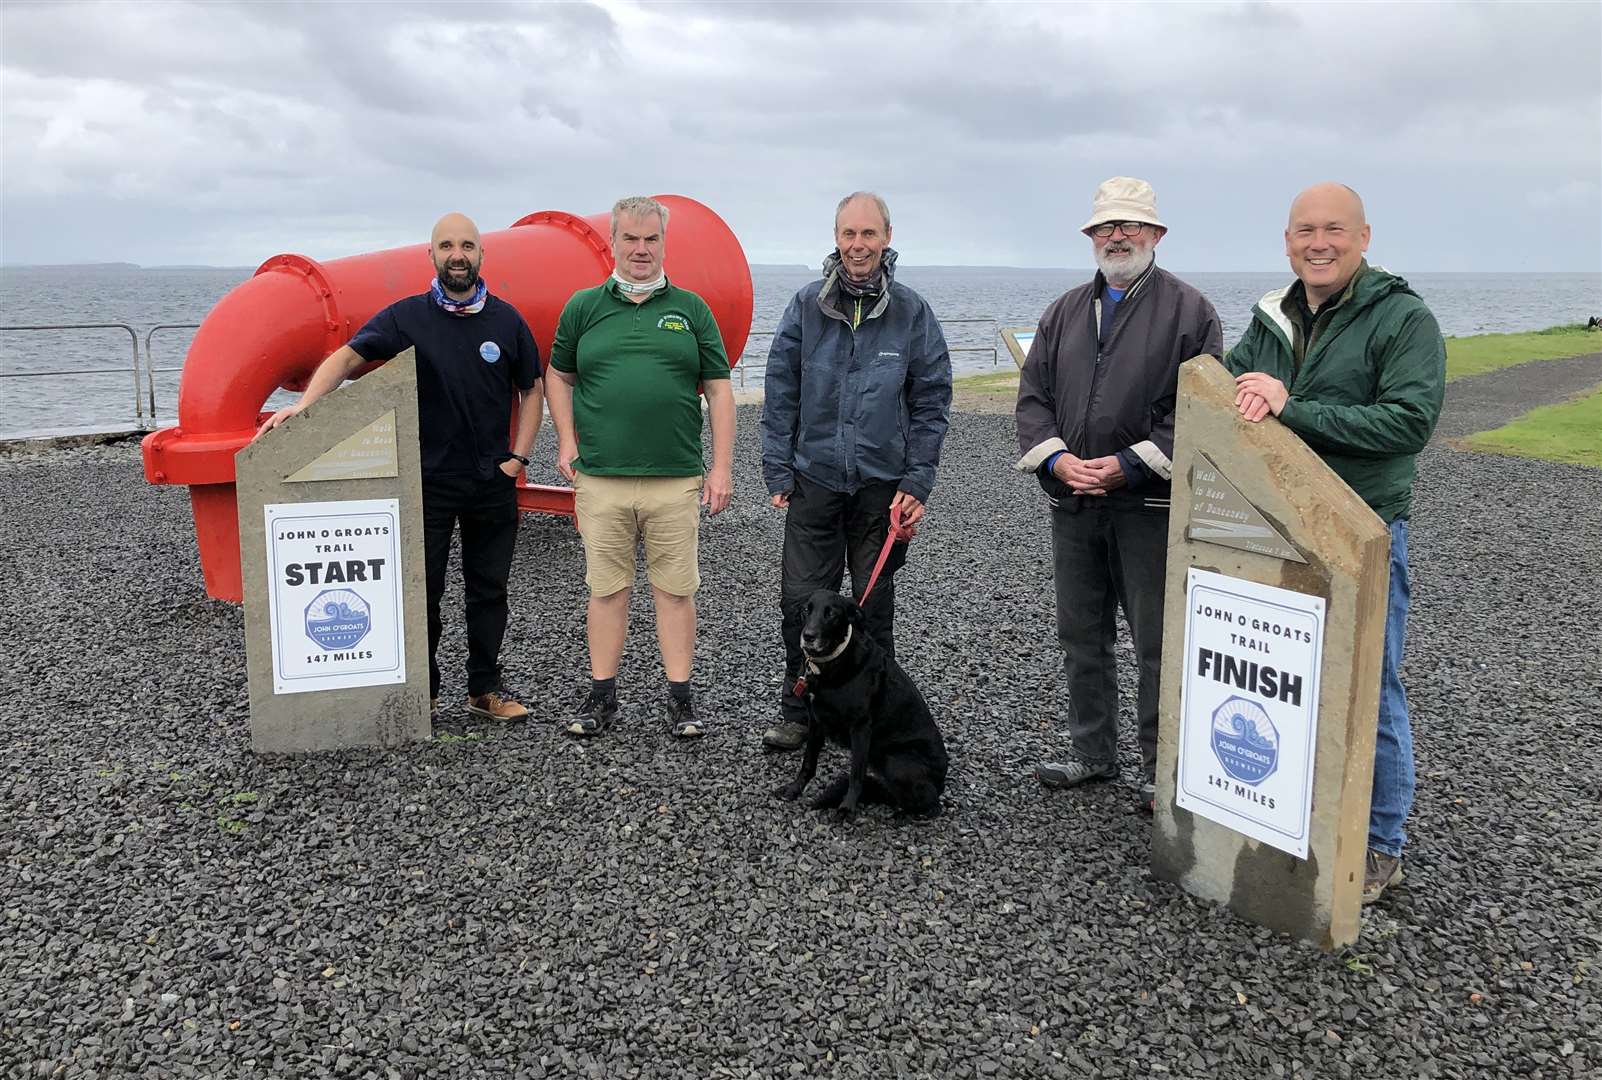 Two of the new trustees Simon Cottam (left) of John O’Groats Brewery, and Ian Ellis (second from the right) at the completed start and finish signs in John O'Groats last summer. Also present are other volunteers from the charity creating the John O’Groats Trail, as well as the North Coast Trail which extends to Cape Wrath – Derek Bremner, Charlie Bain and Jay Wilson.